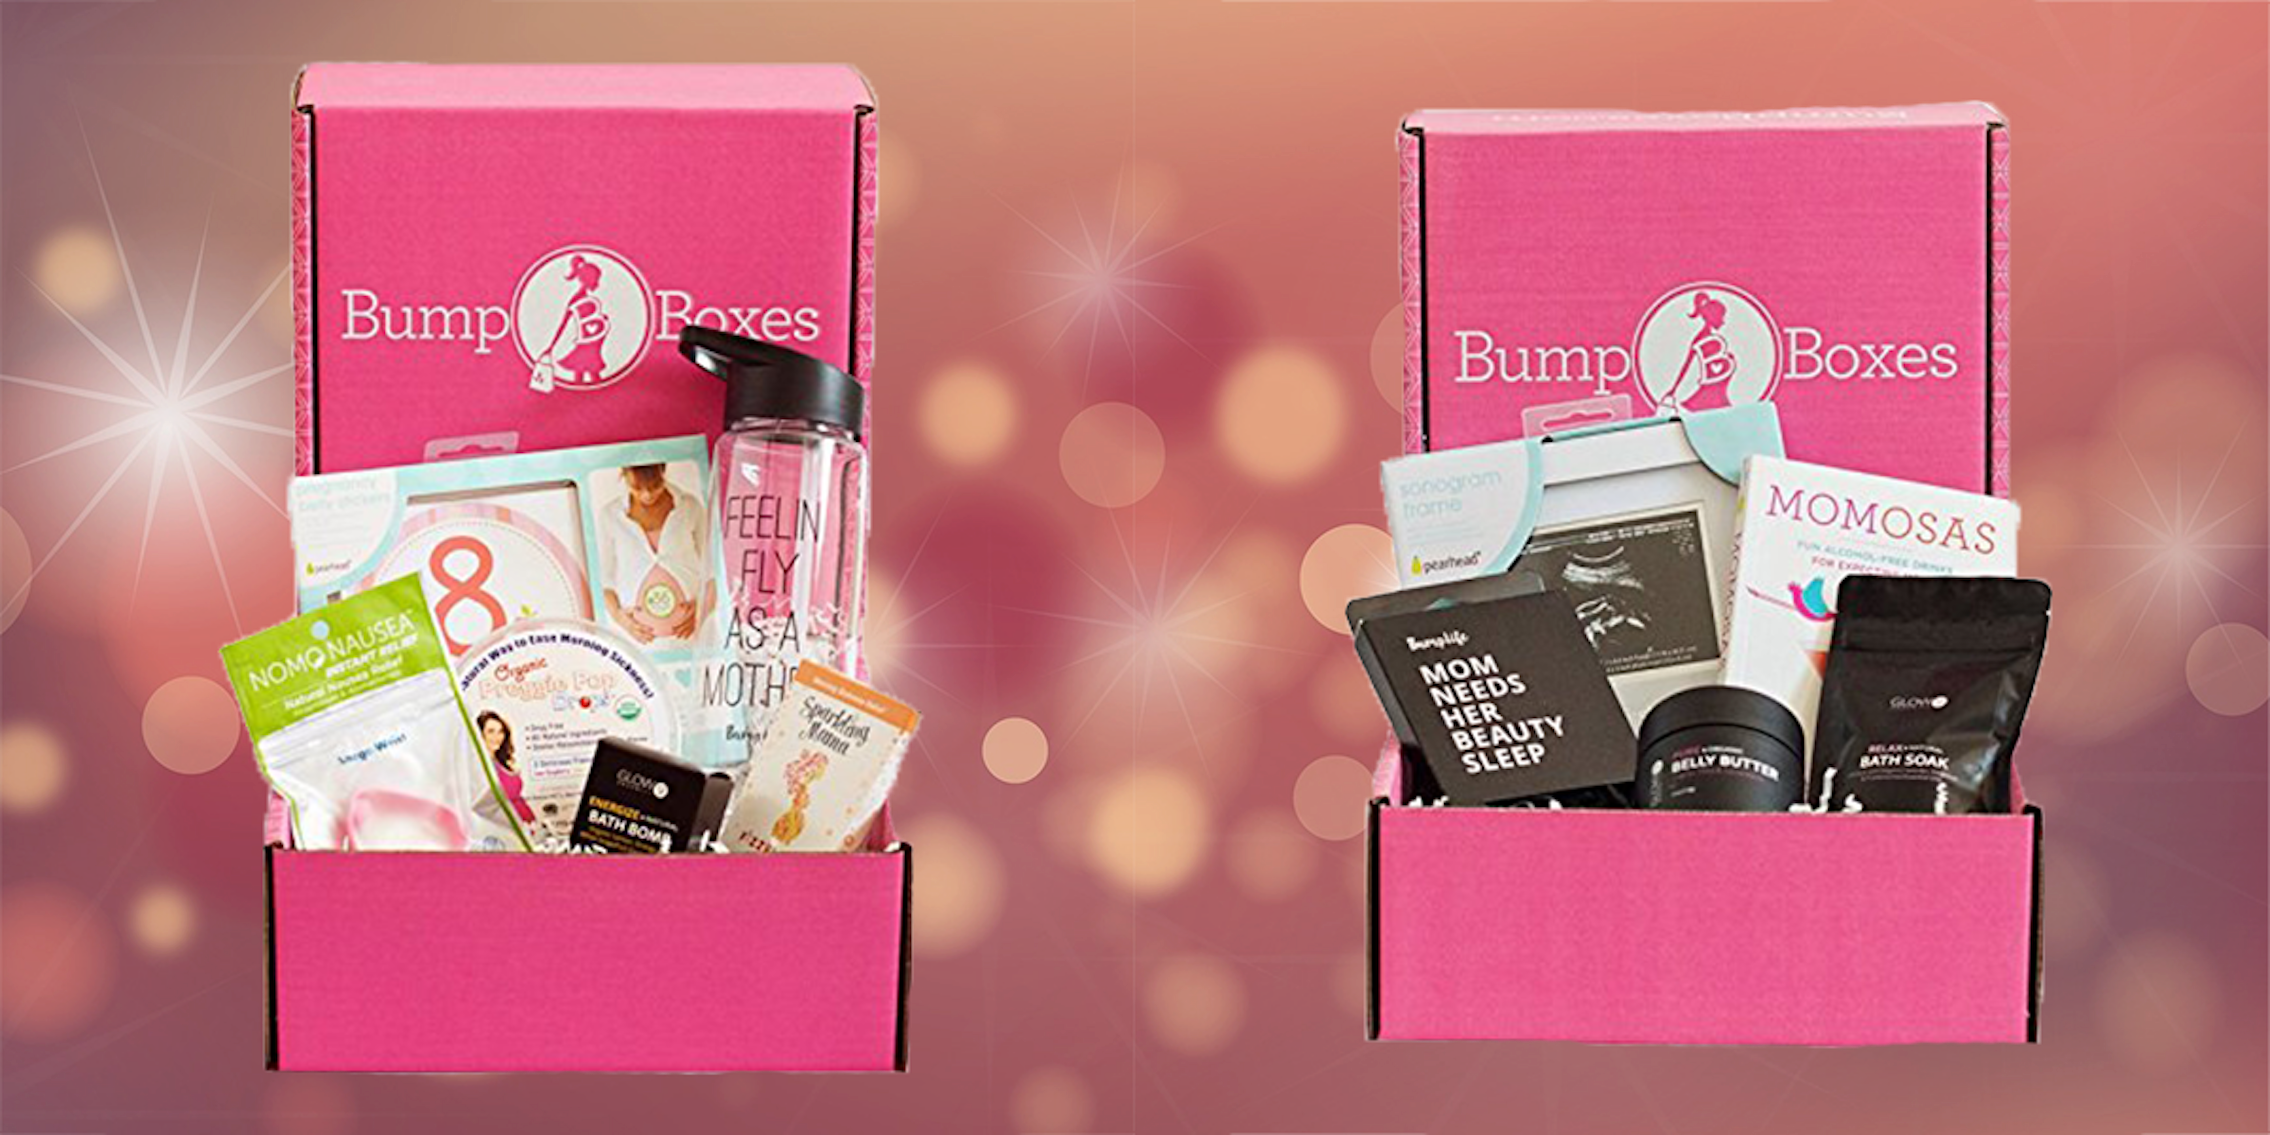 Bump Boxes help you shop for your pregnant friend with ease